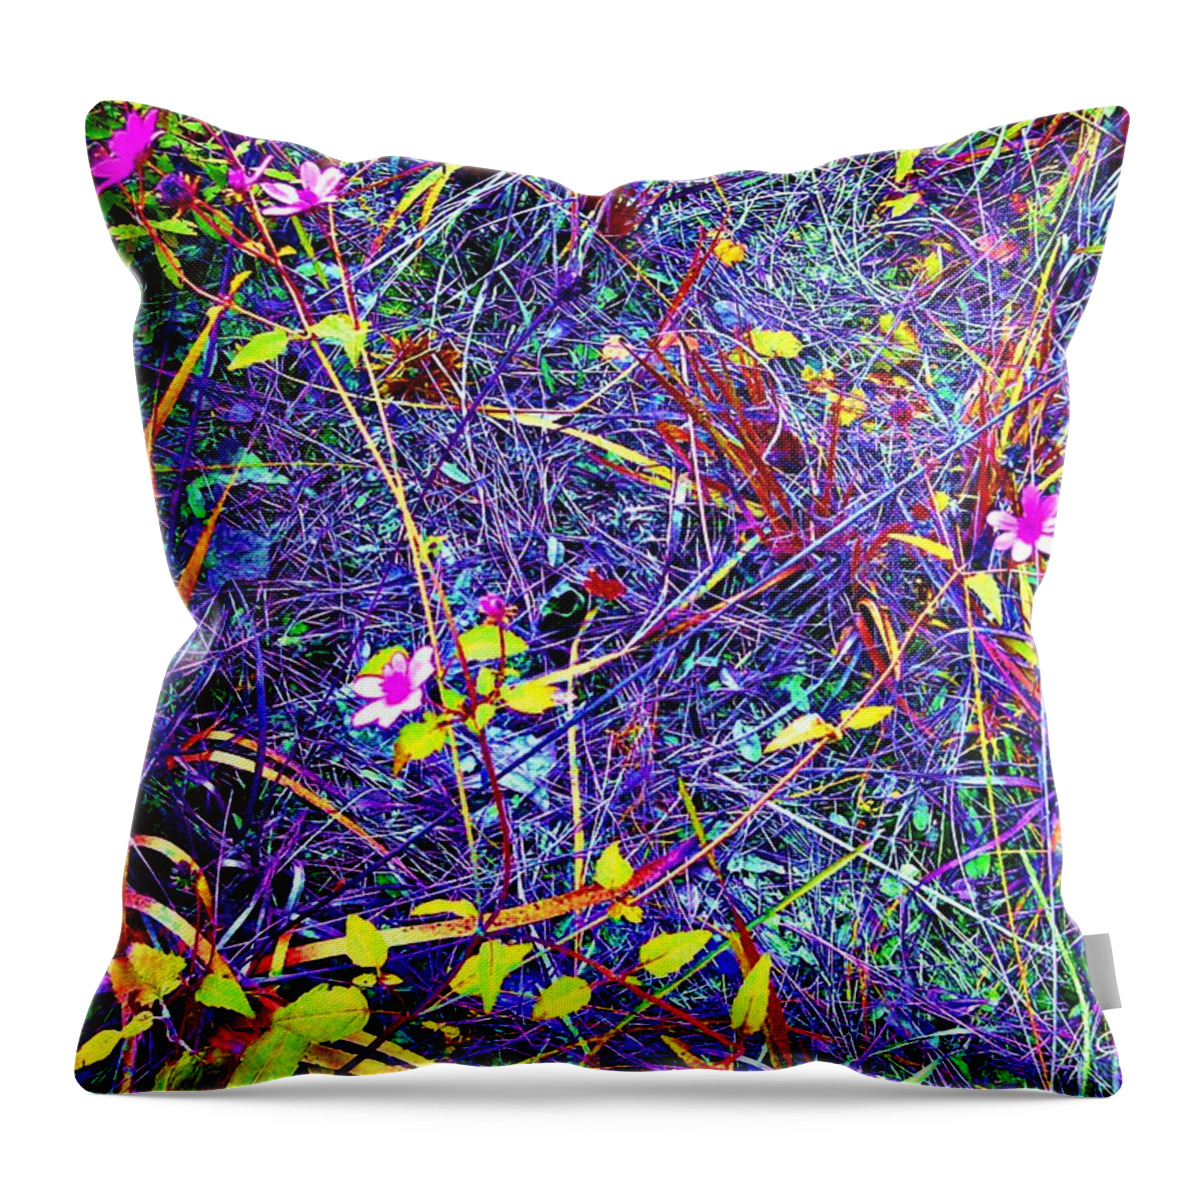 Rainbow Throw Pillow featuring the photograph Rainbow Jungle Wild Flower Patch by George Pedro